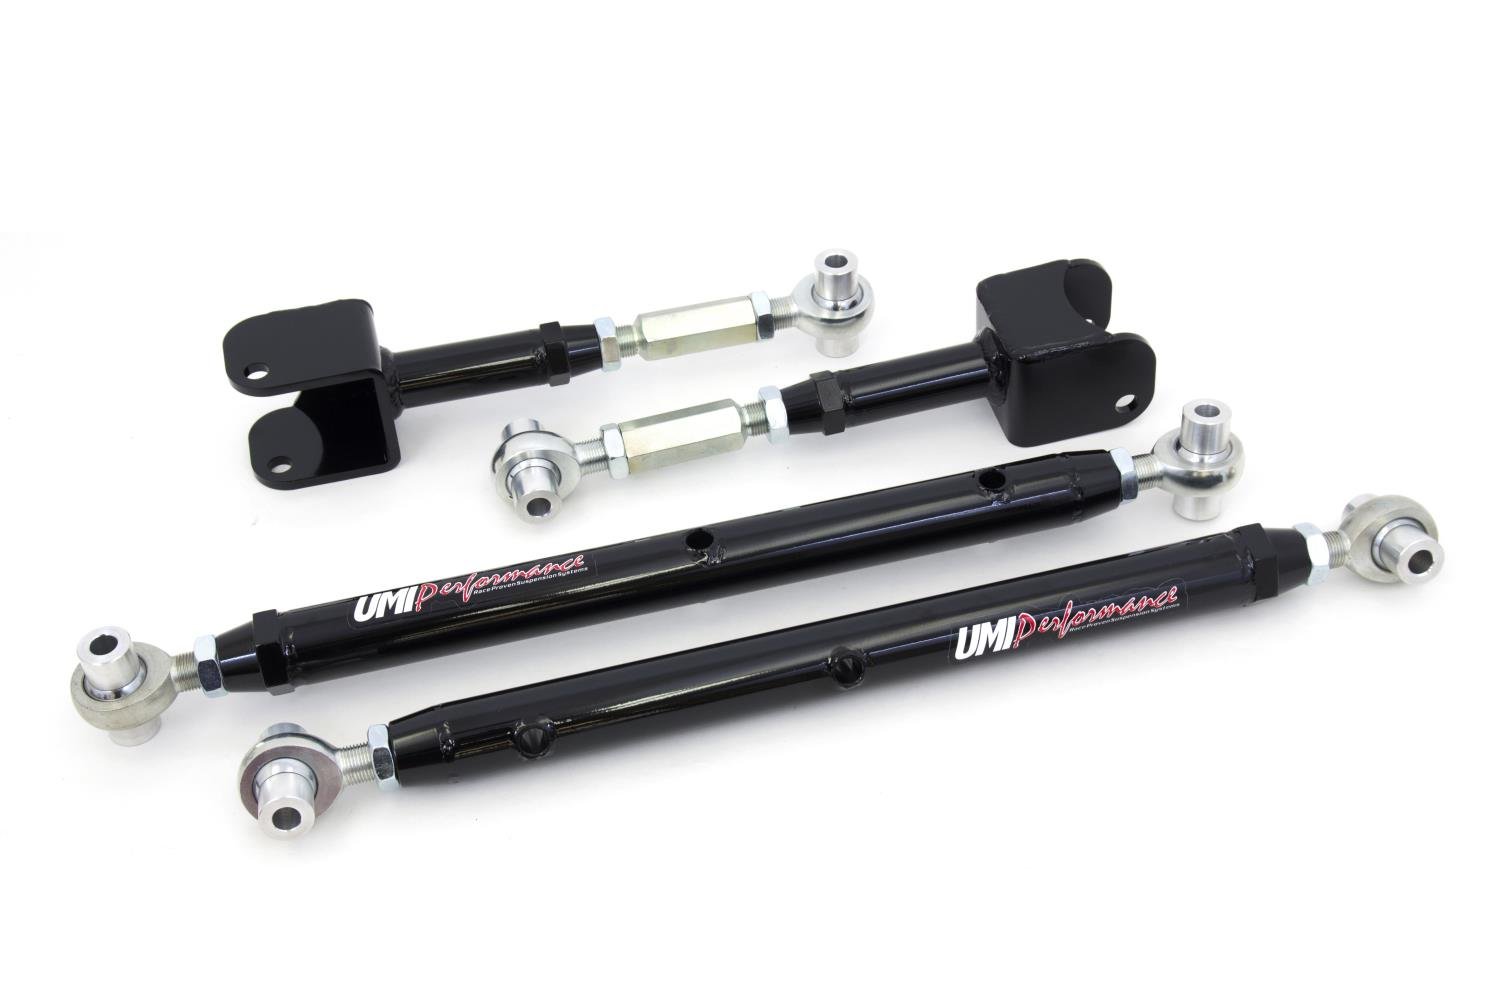 Double adjustable upper and lower rear trailing arms